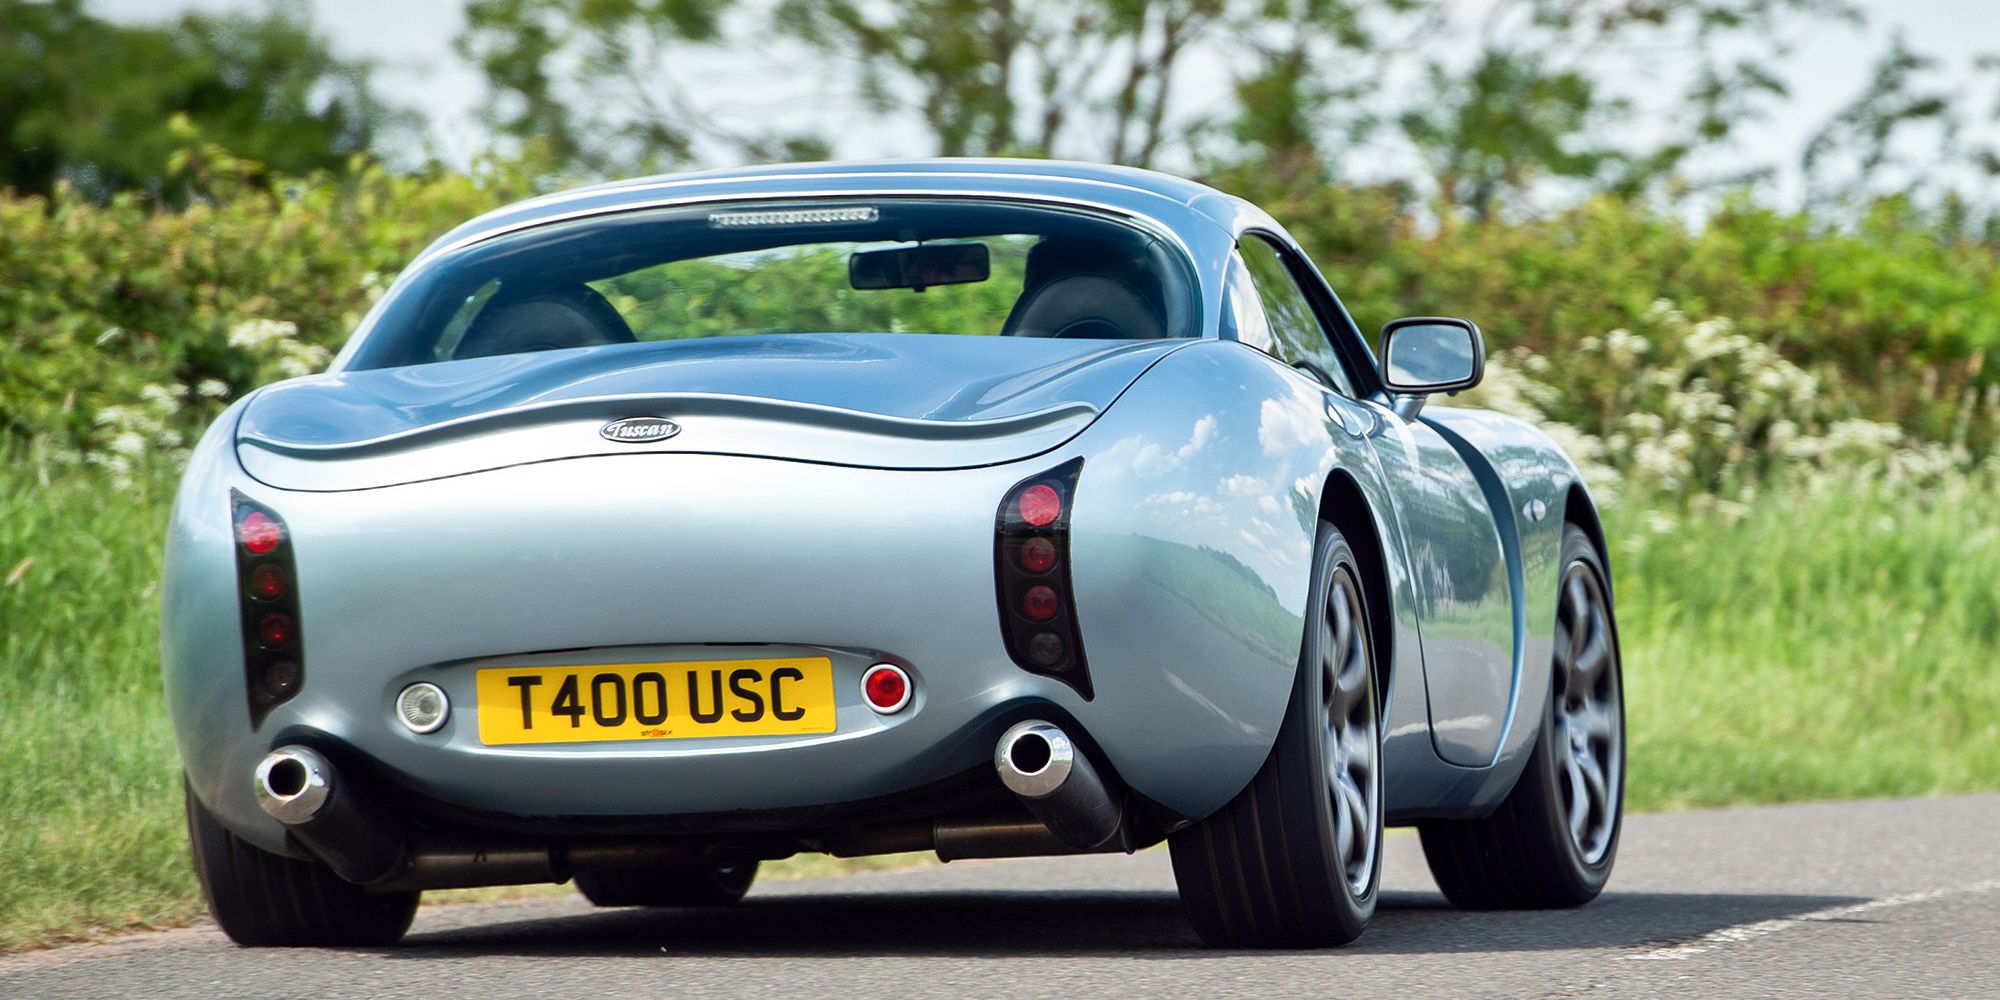 The rear of the TVR Tuscan on the move